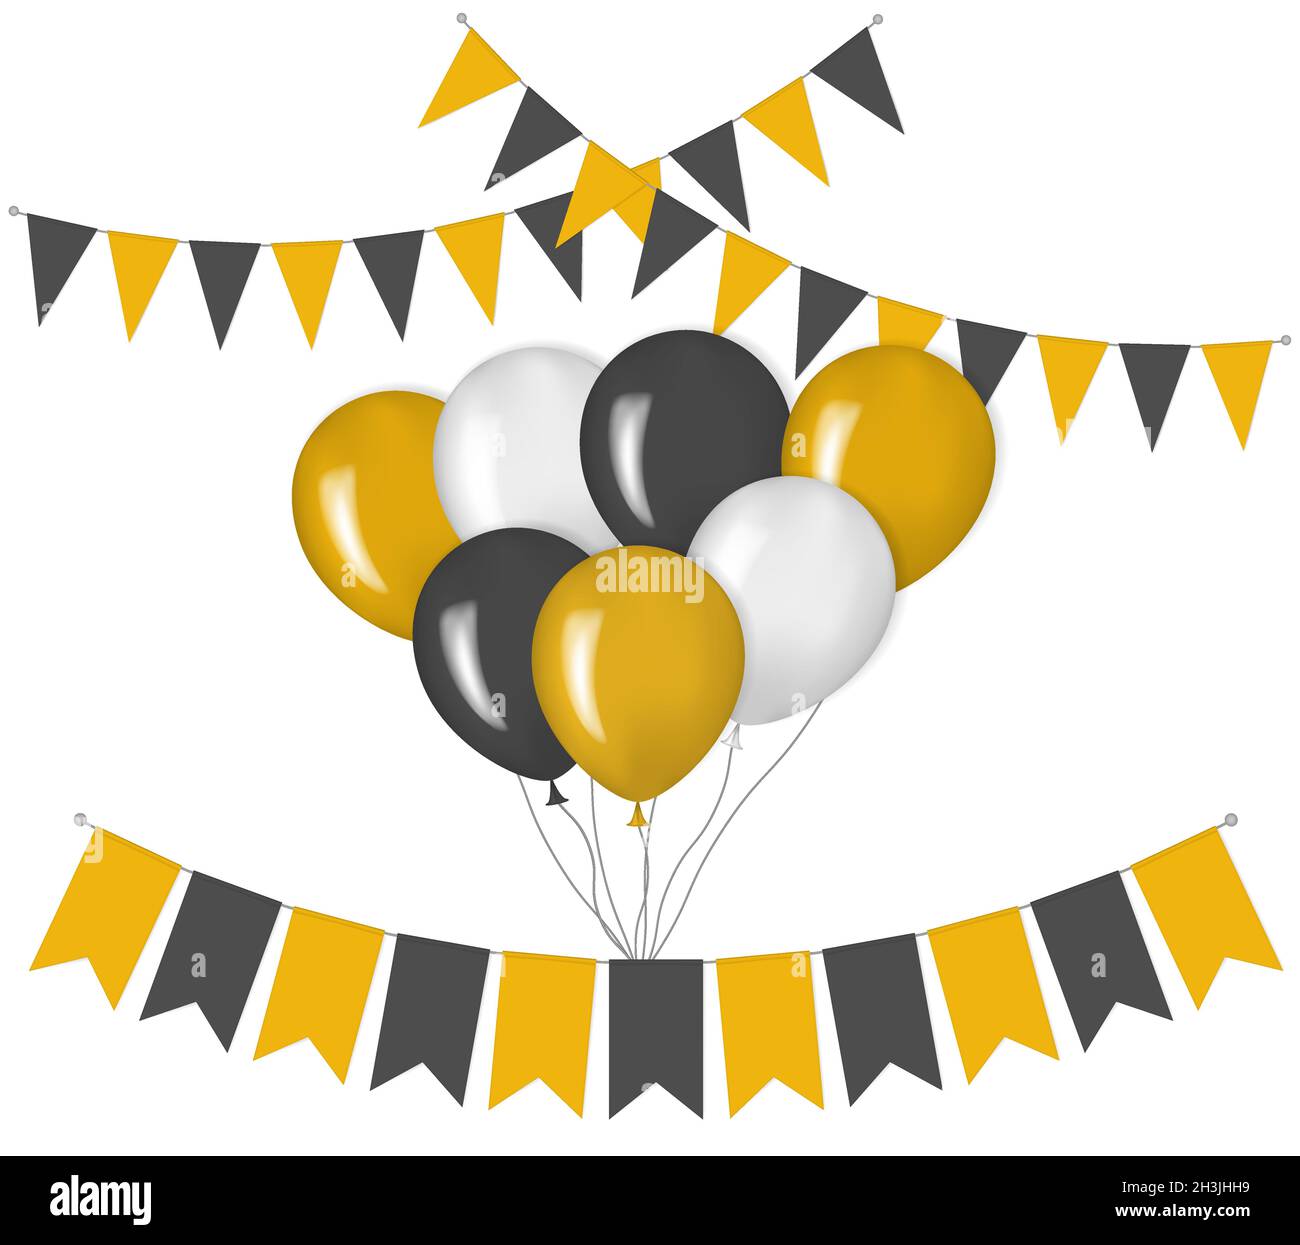 Holiday decorations, vector illustration. Balloon bunch and pennant banner hanging flags. White, black, orange colors Stock Vector